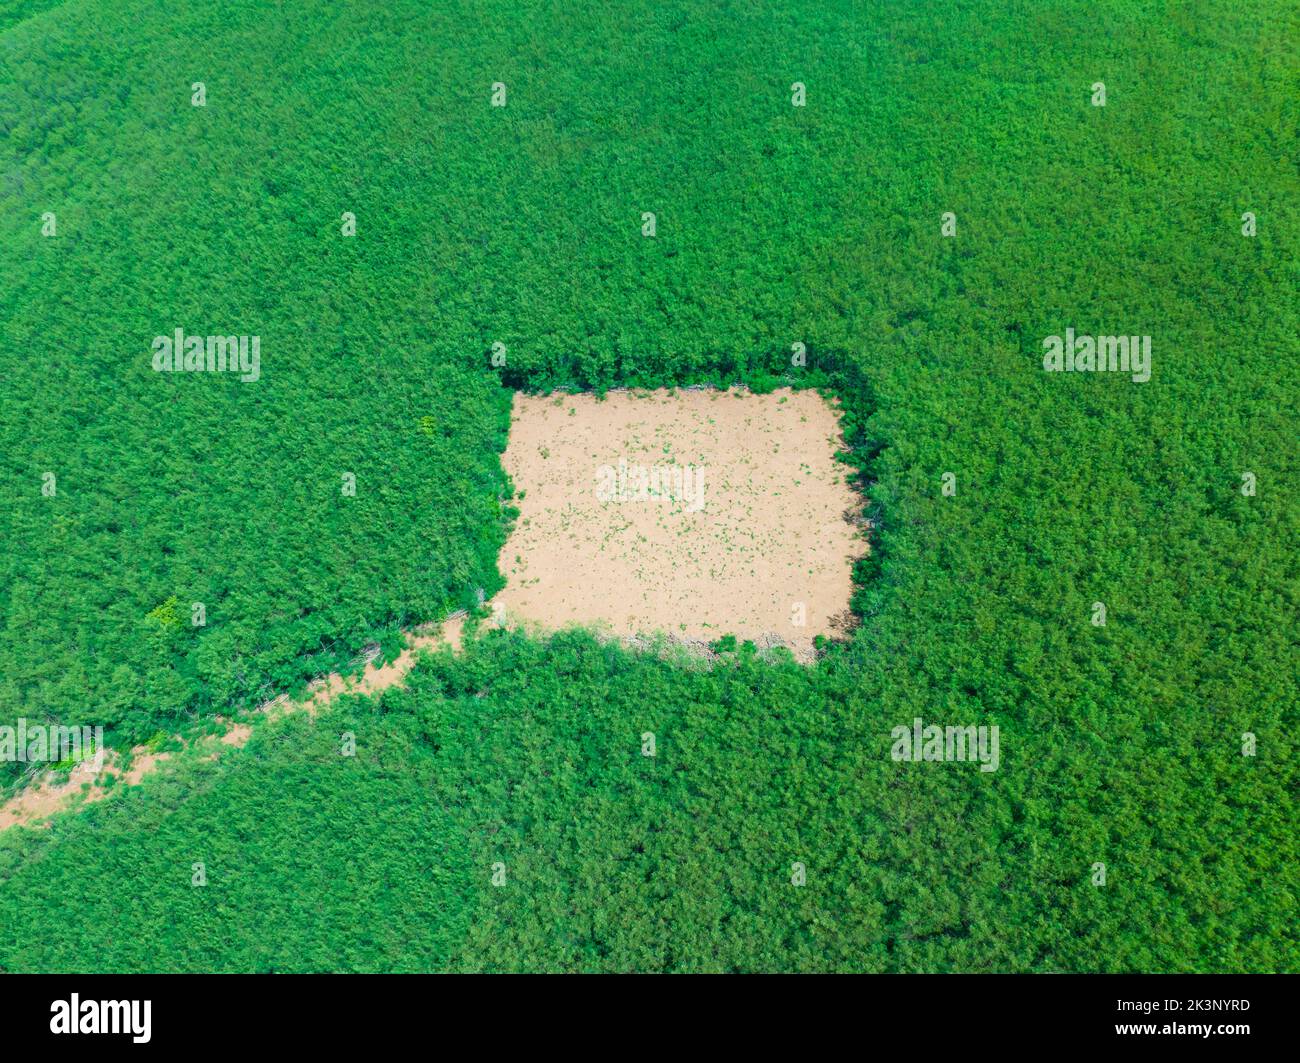 Aerial view of dialog sign on the grass field Stock Photo